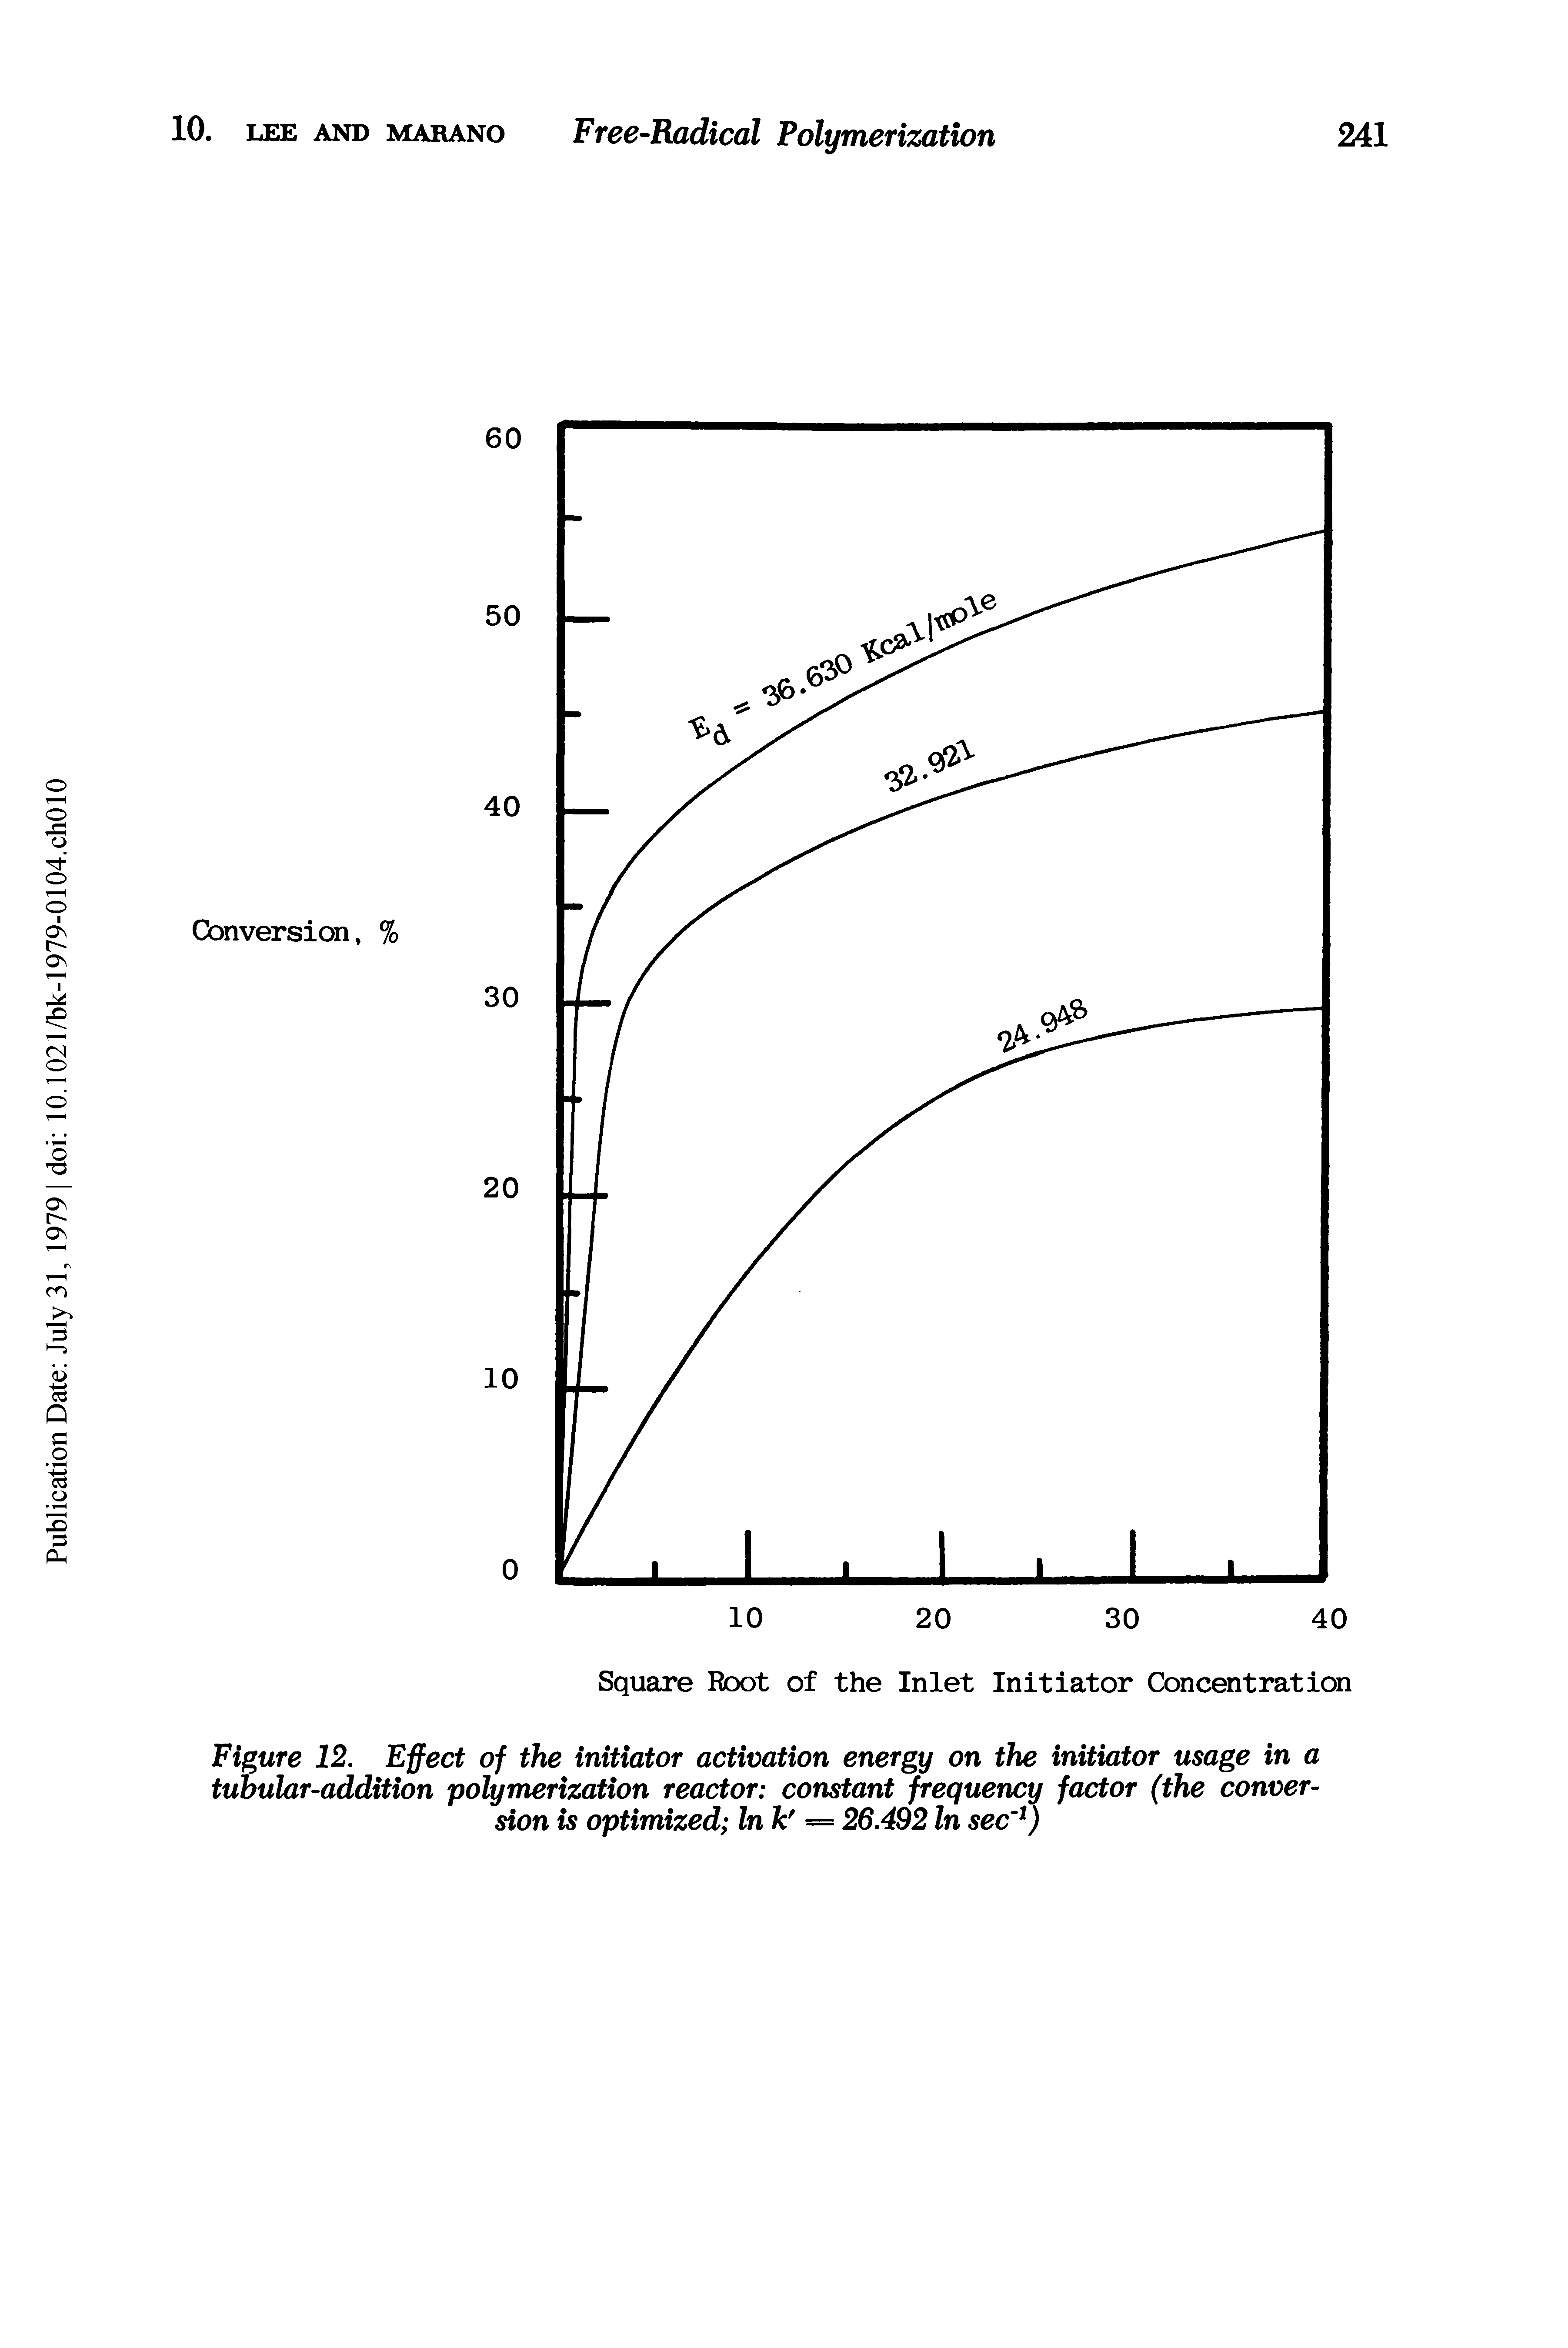 Figure 12. Effect of the initiator activation energy on the initiator usage in a tubular-addition polymerization reactor constant frequency factor (the conversion is optimized In k = 26.492 In sec )...